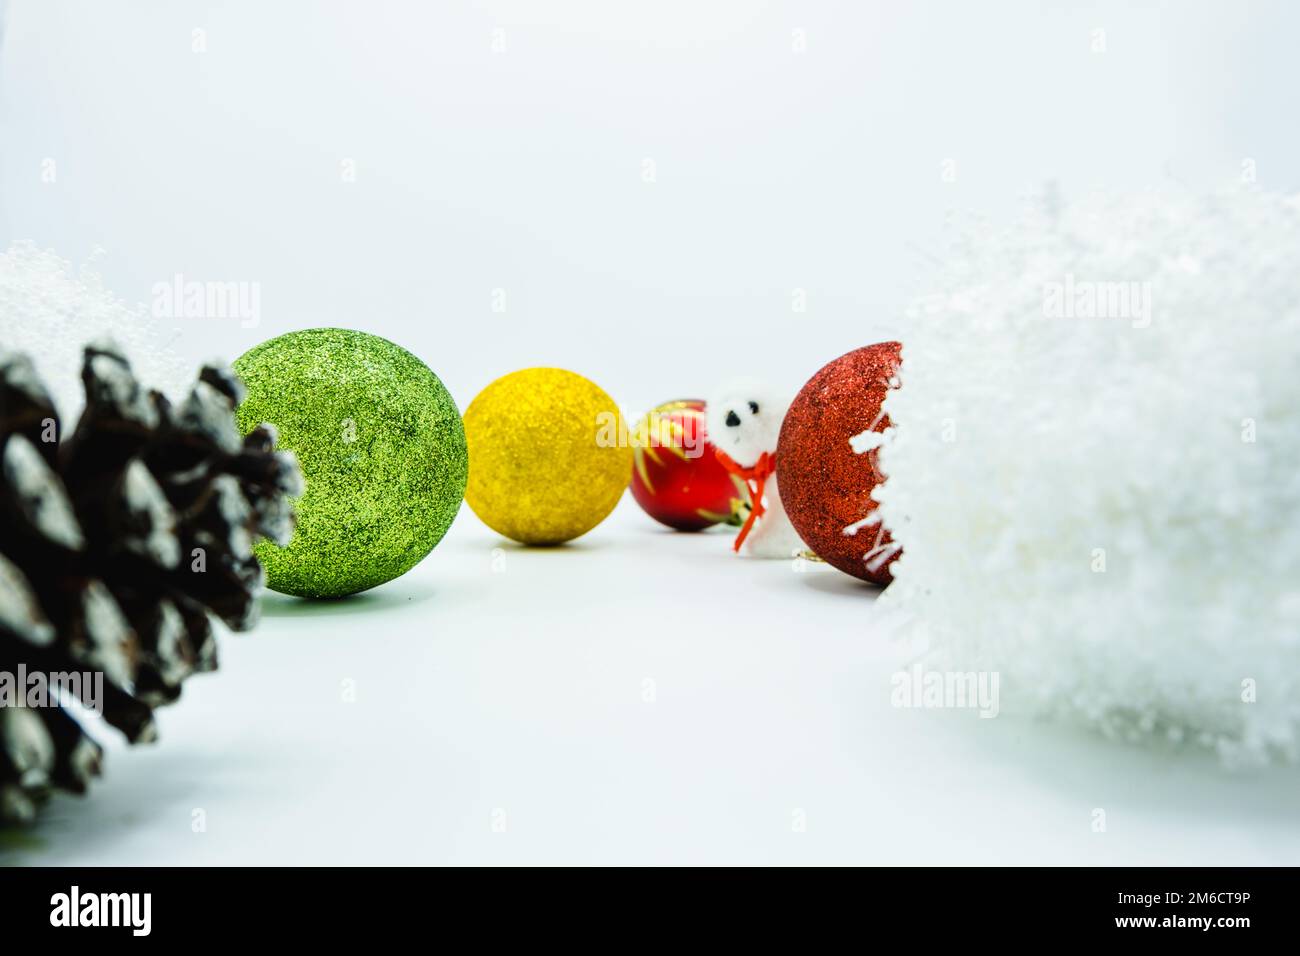 White, green, red, and yellow christmas balls with polar bear and pine cone on white. Stock Photo